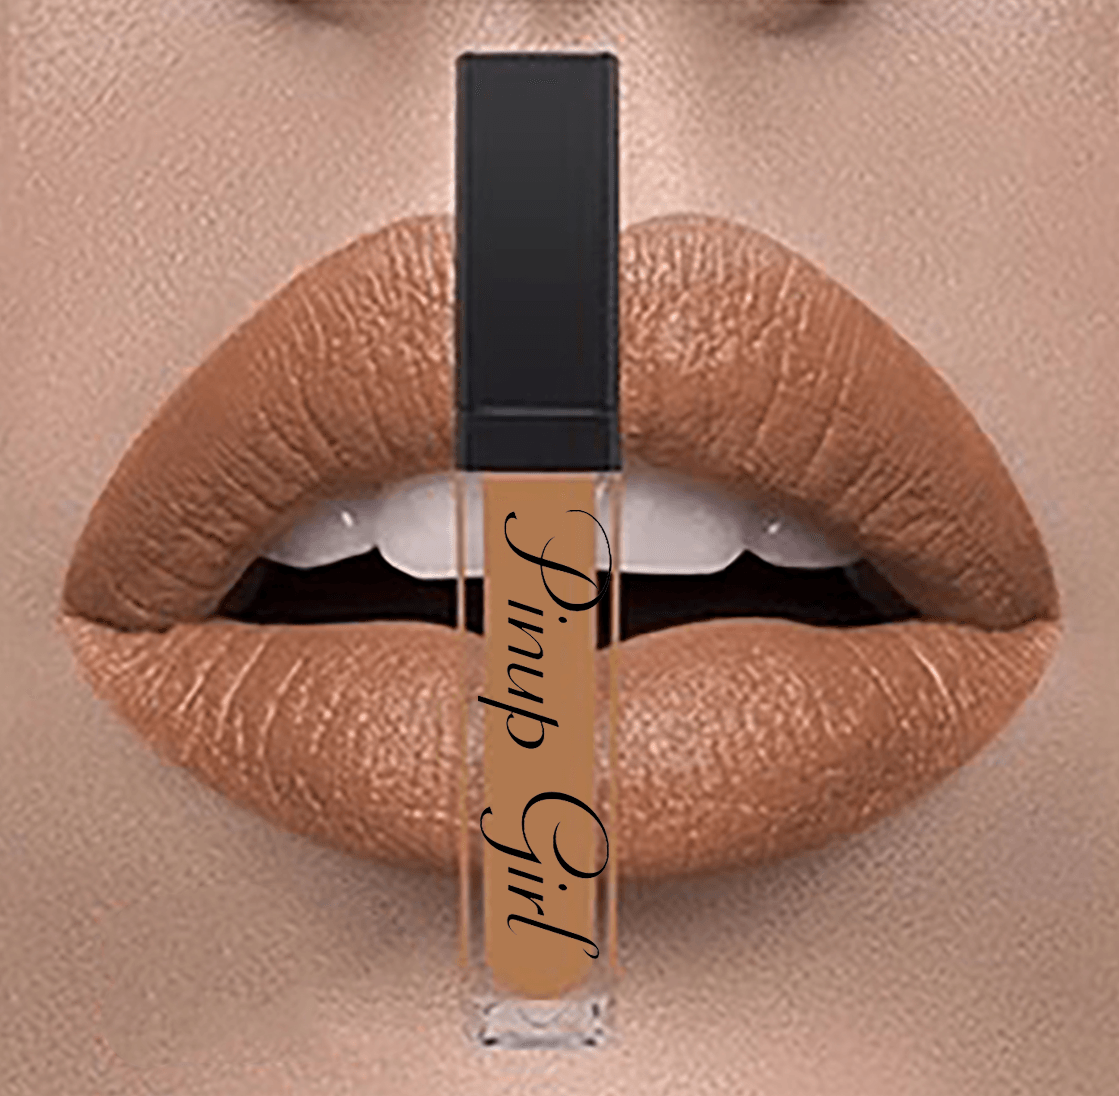 Pictured is a swatch of the Pinup Girl Clothing no smudge liquid matte lipstick in Courtier Whisper Nude